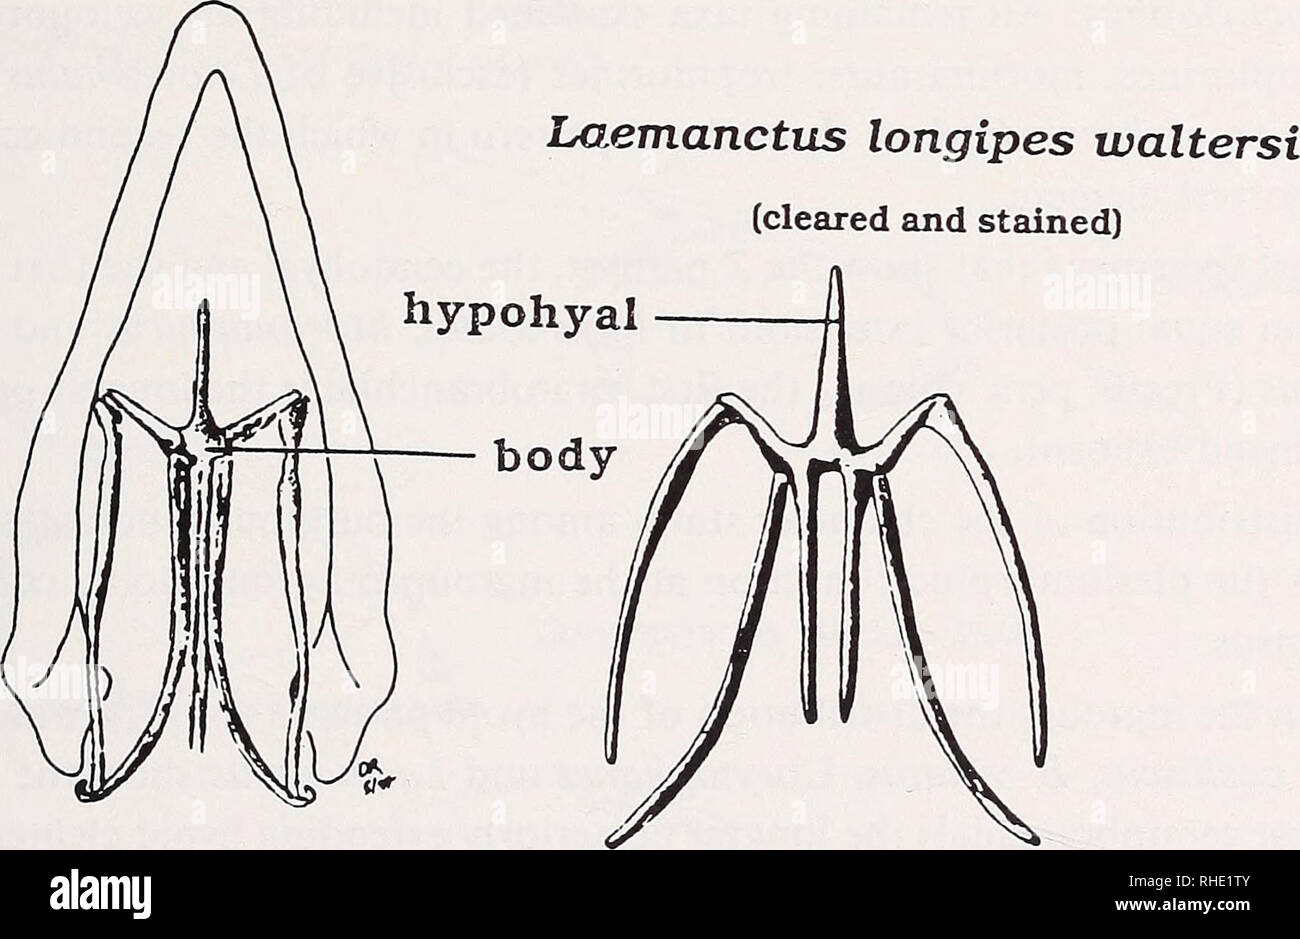 . Bonner zoologische Monographien. Zoology. ceratobranchial 2 Basiliscus plumifrons. Laemanctus longipes waltersi (dry skeleton) Fig. 32. Two different patterns of hyoid apparatus identified within the ingroup and among non- basiliscine &quot;iguanids&quot;. Phymaturus palluma and Laemanctus longipes shows A'-pattern in which the second ceratobranchials are the shortest posterior extending elements. Basiliscus plumifrons shows the Z-pattern with an elongated second ceratobranchial. Notice also the drying effect of skeletal elements in Laemanctus longipes with apparent fusion of the median seco Stock Photo